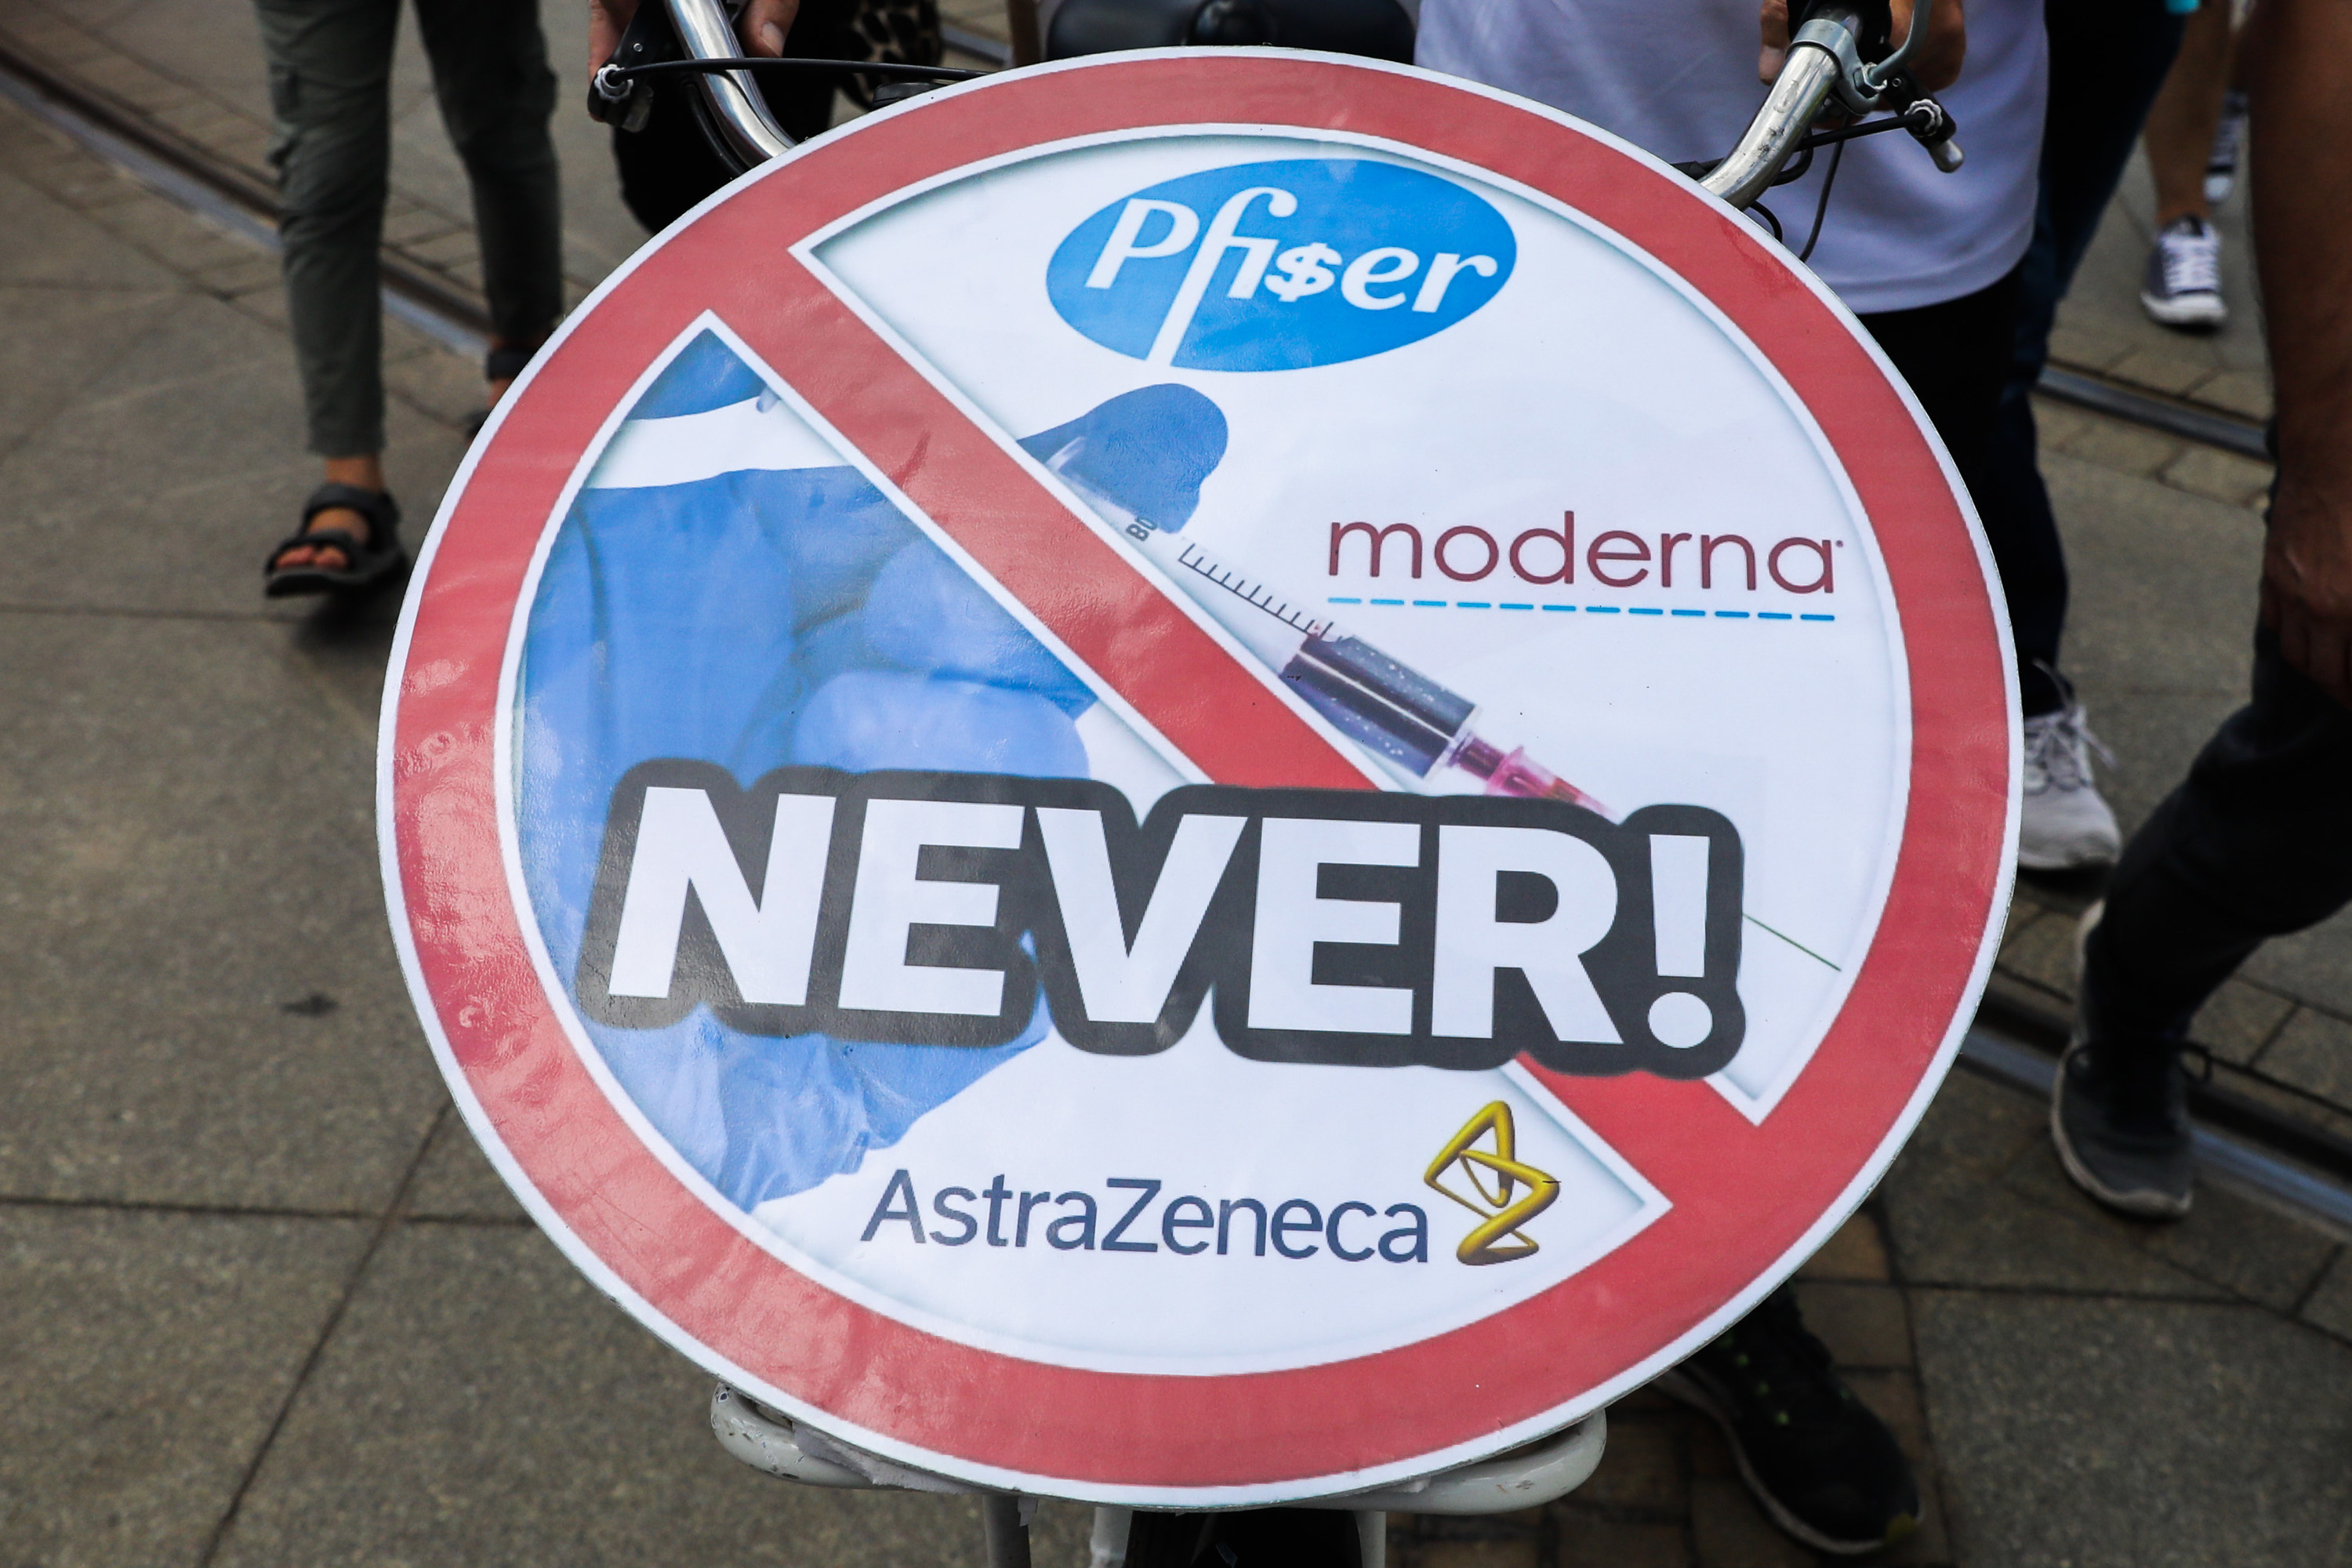 Anti-vaccine sign with &quot;NEVER&quot; written across the logos of vaccine manufacturers